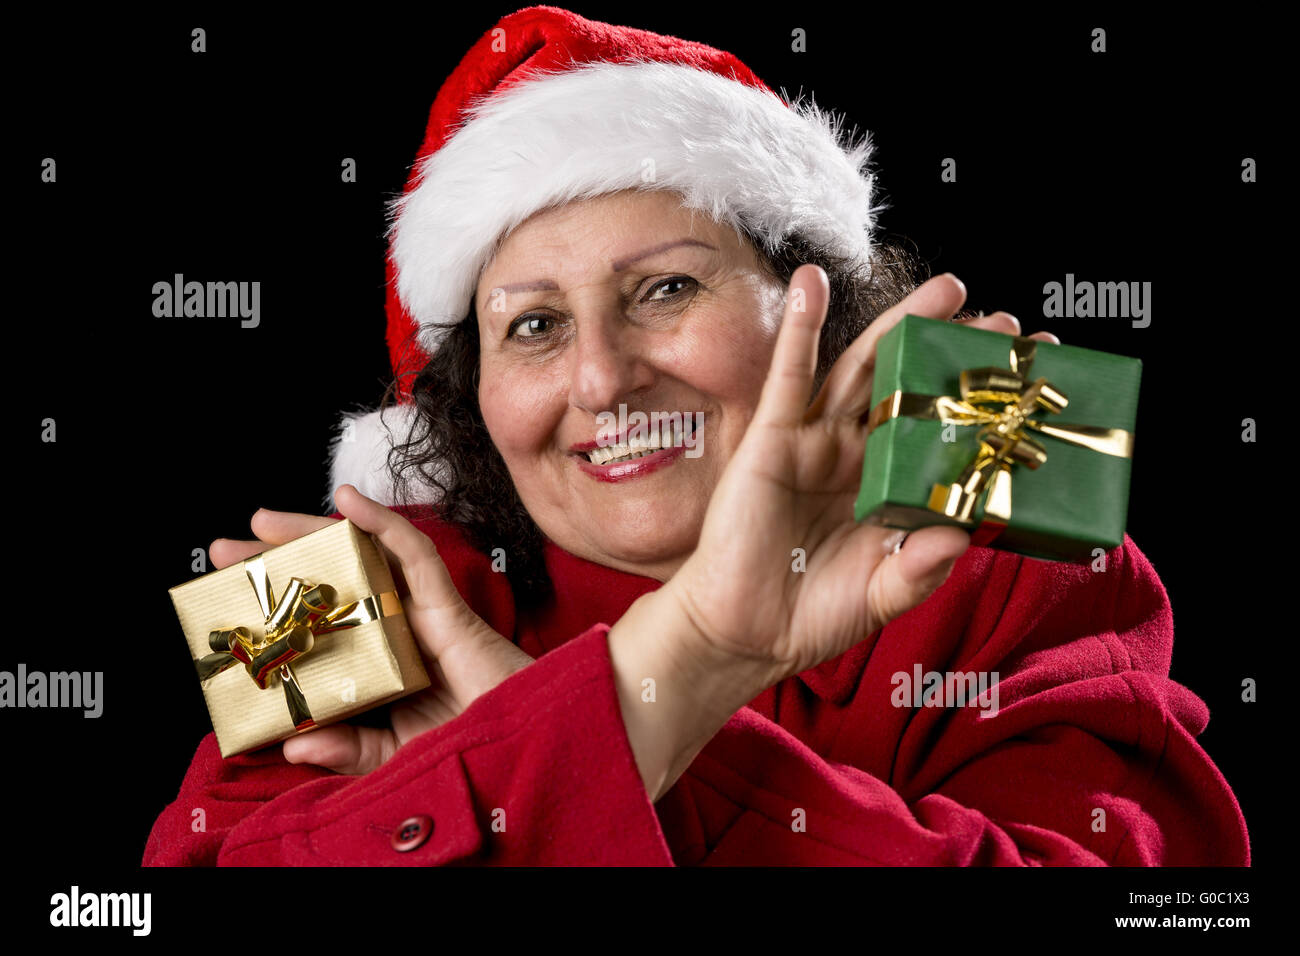 Smiling Female Senior Showing Two Wrapped Gifts Stock Photo